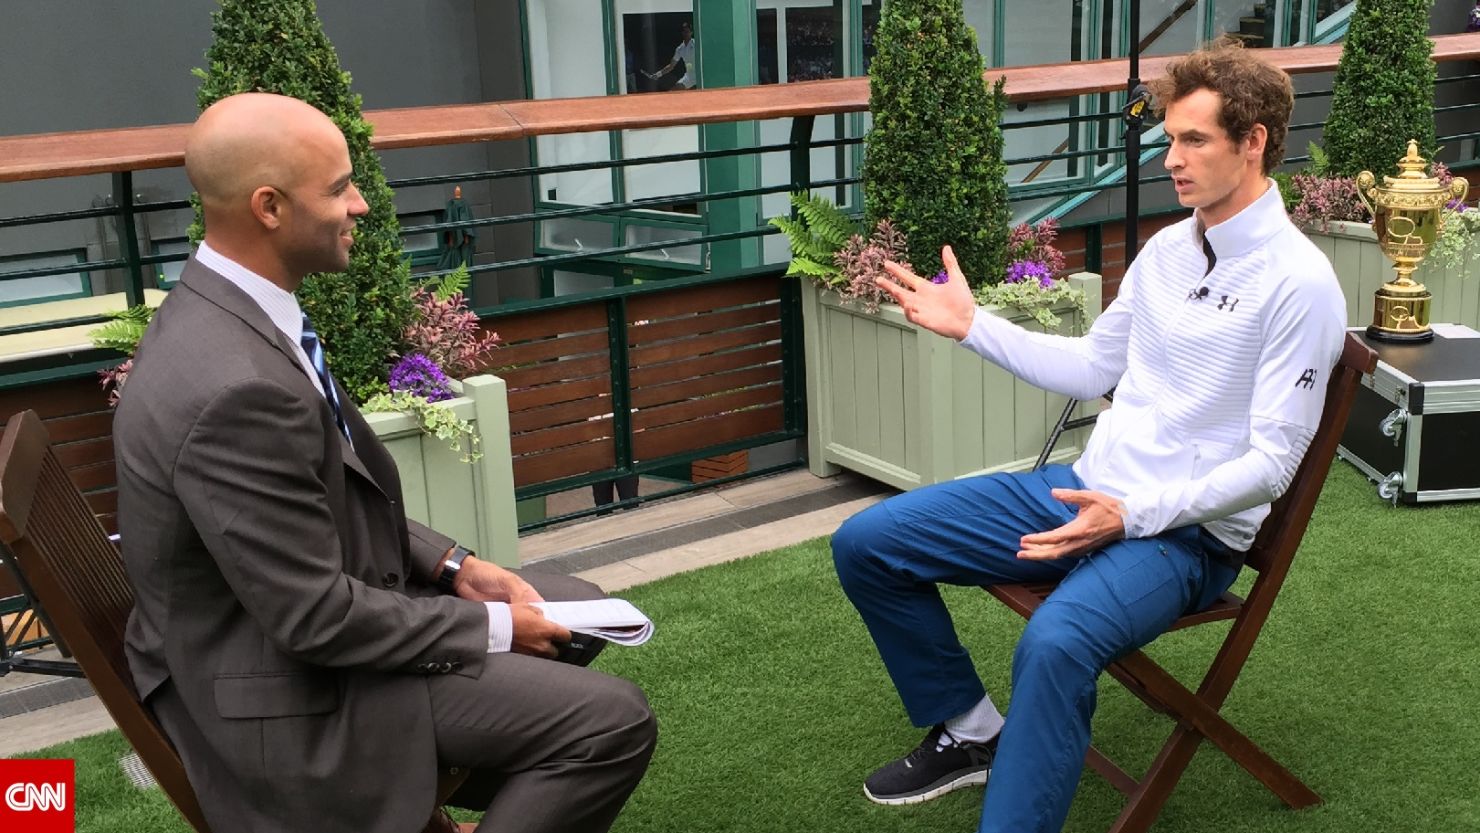 Wimbledon champ Andy Murray (right) spoke to CNN's James Blake about the change of gun laws after the Dunblane massacre in 1996. Murray was in a nearby classroom during the shooting. 